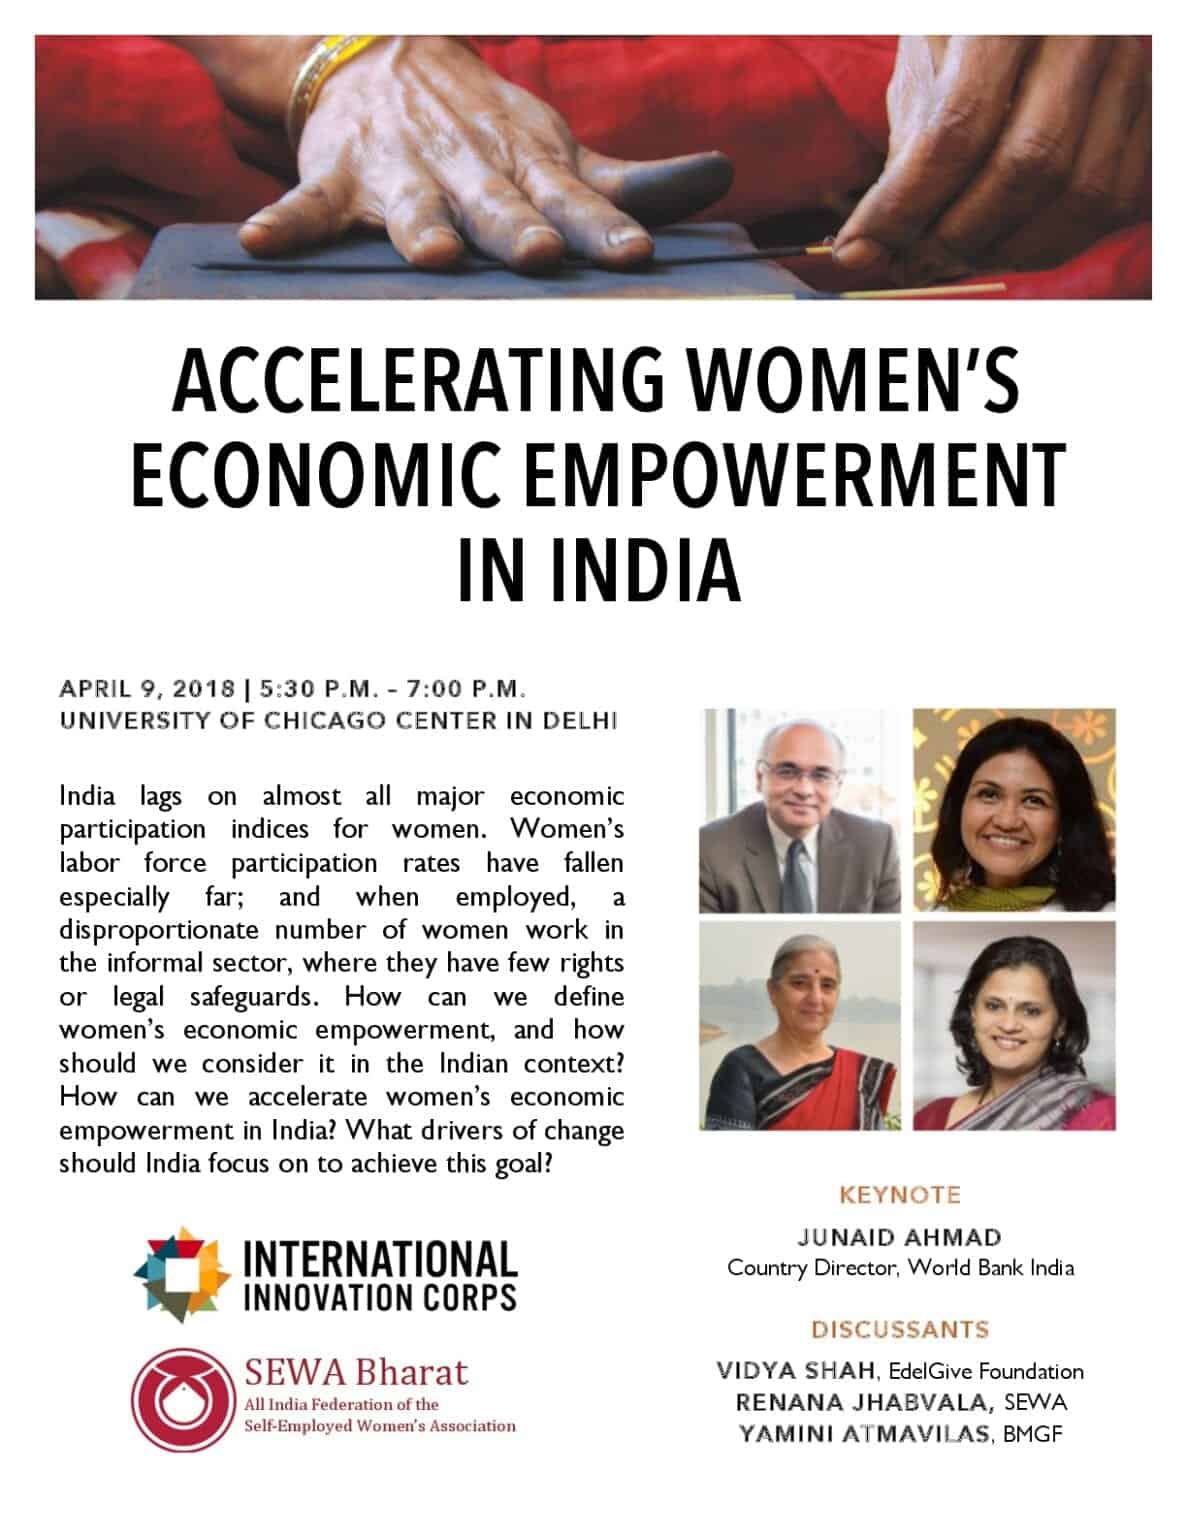 literature review on women's empowerment in india